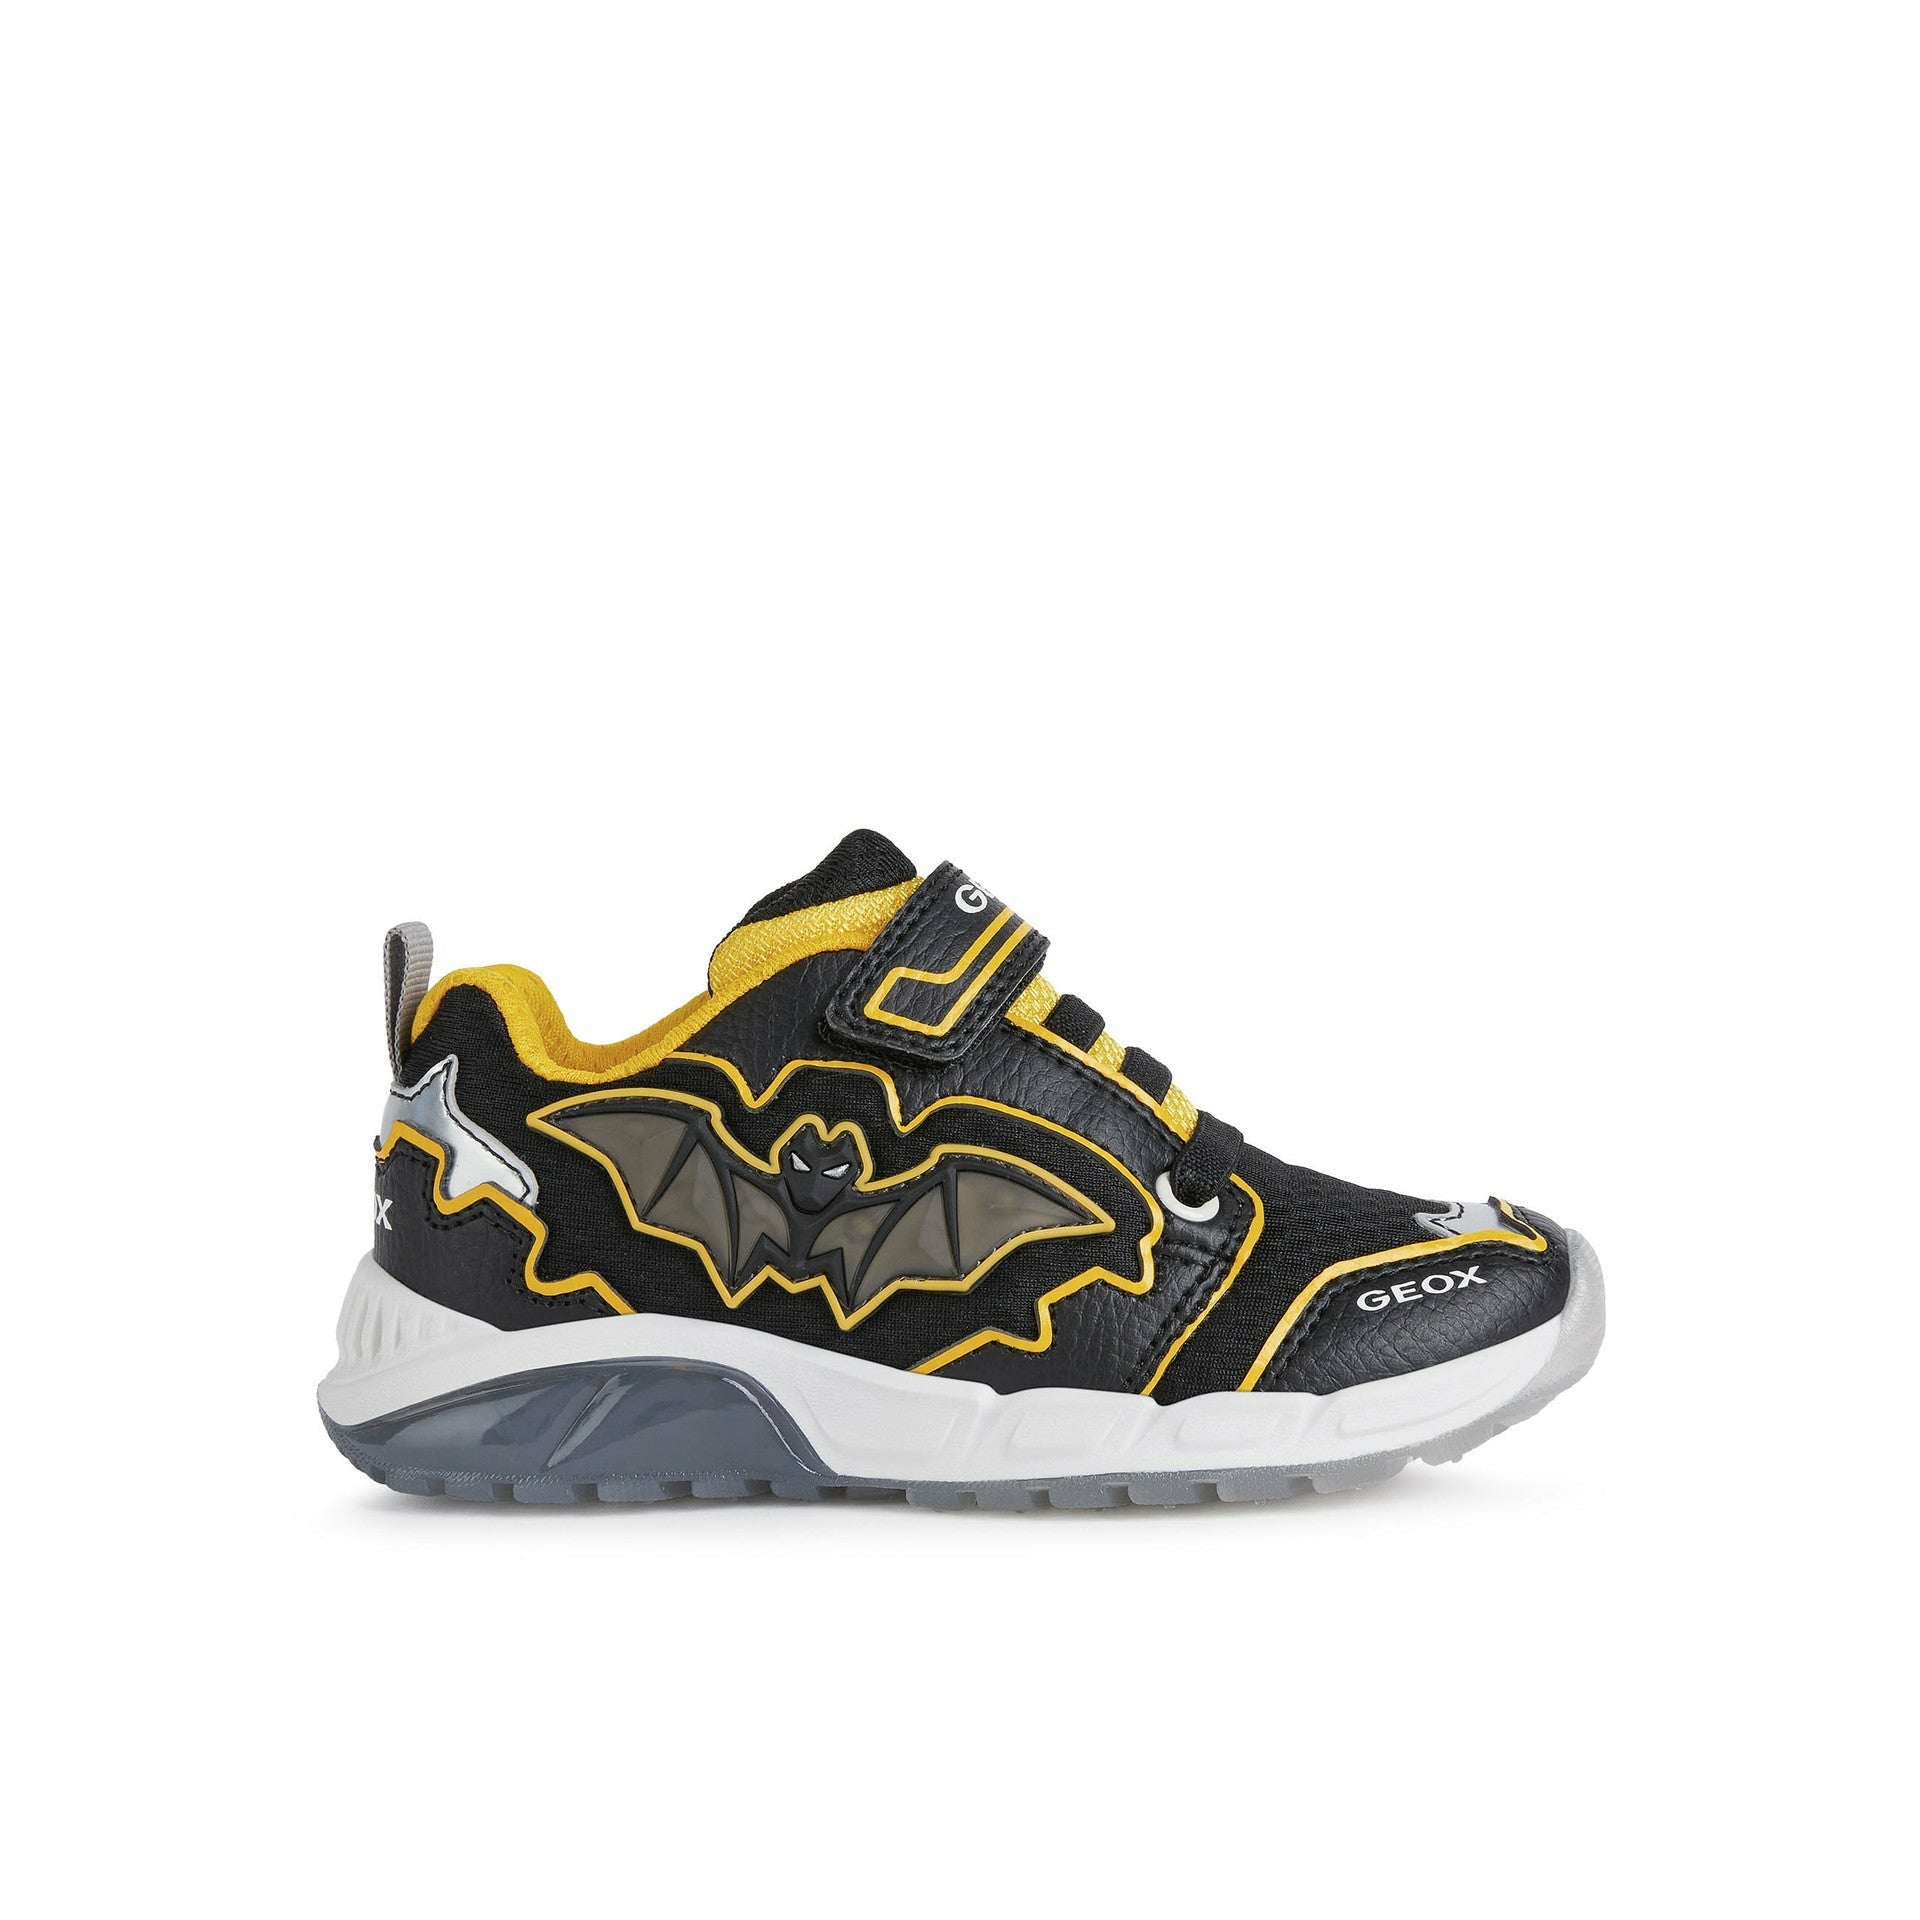 Geox Spaziale  - Boys Velcro Trainer with Lights in Black/Yellow | Geox Shoes | Childrens Shoe Fitting | Wisemans | Bantry | West Cork | Ireland